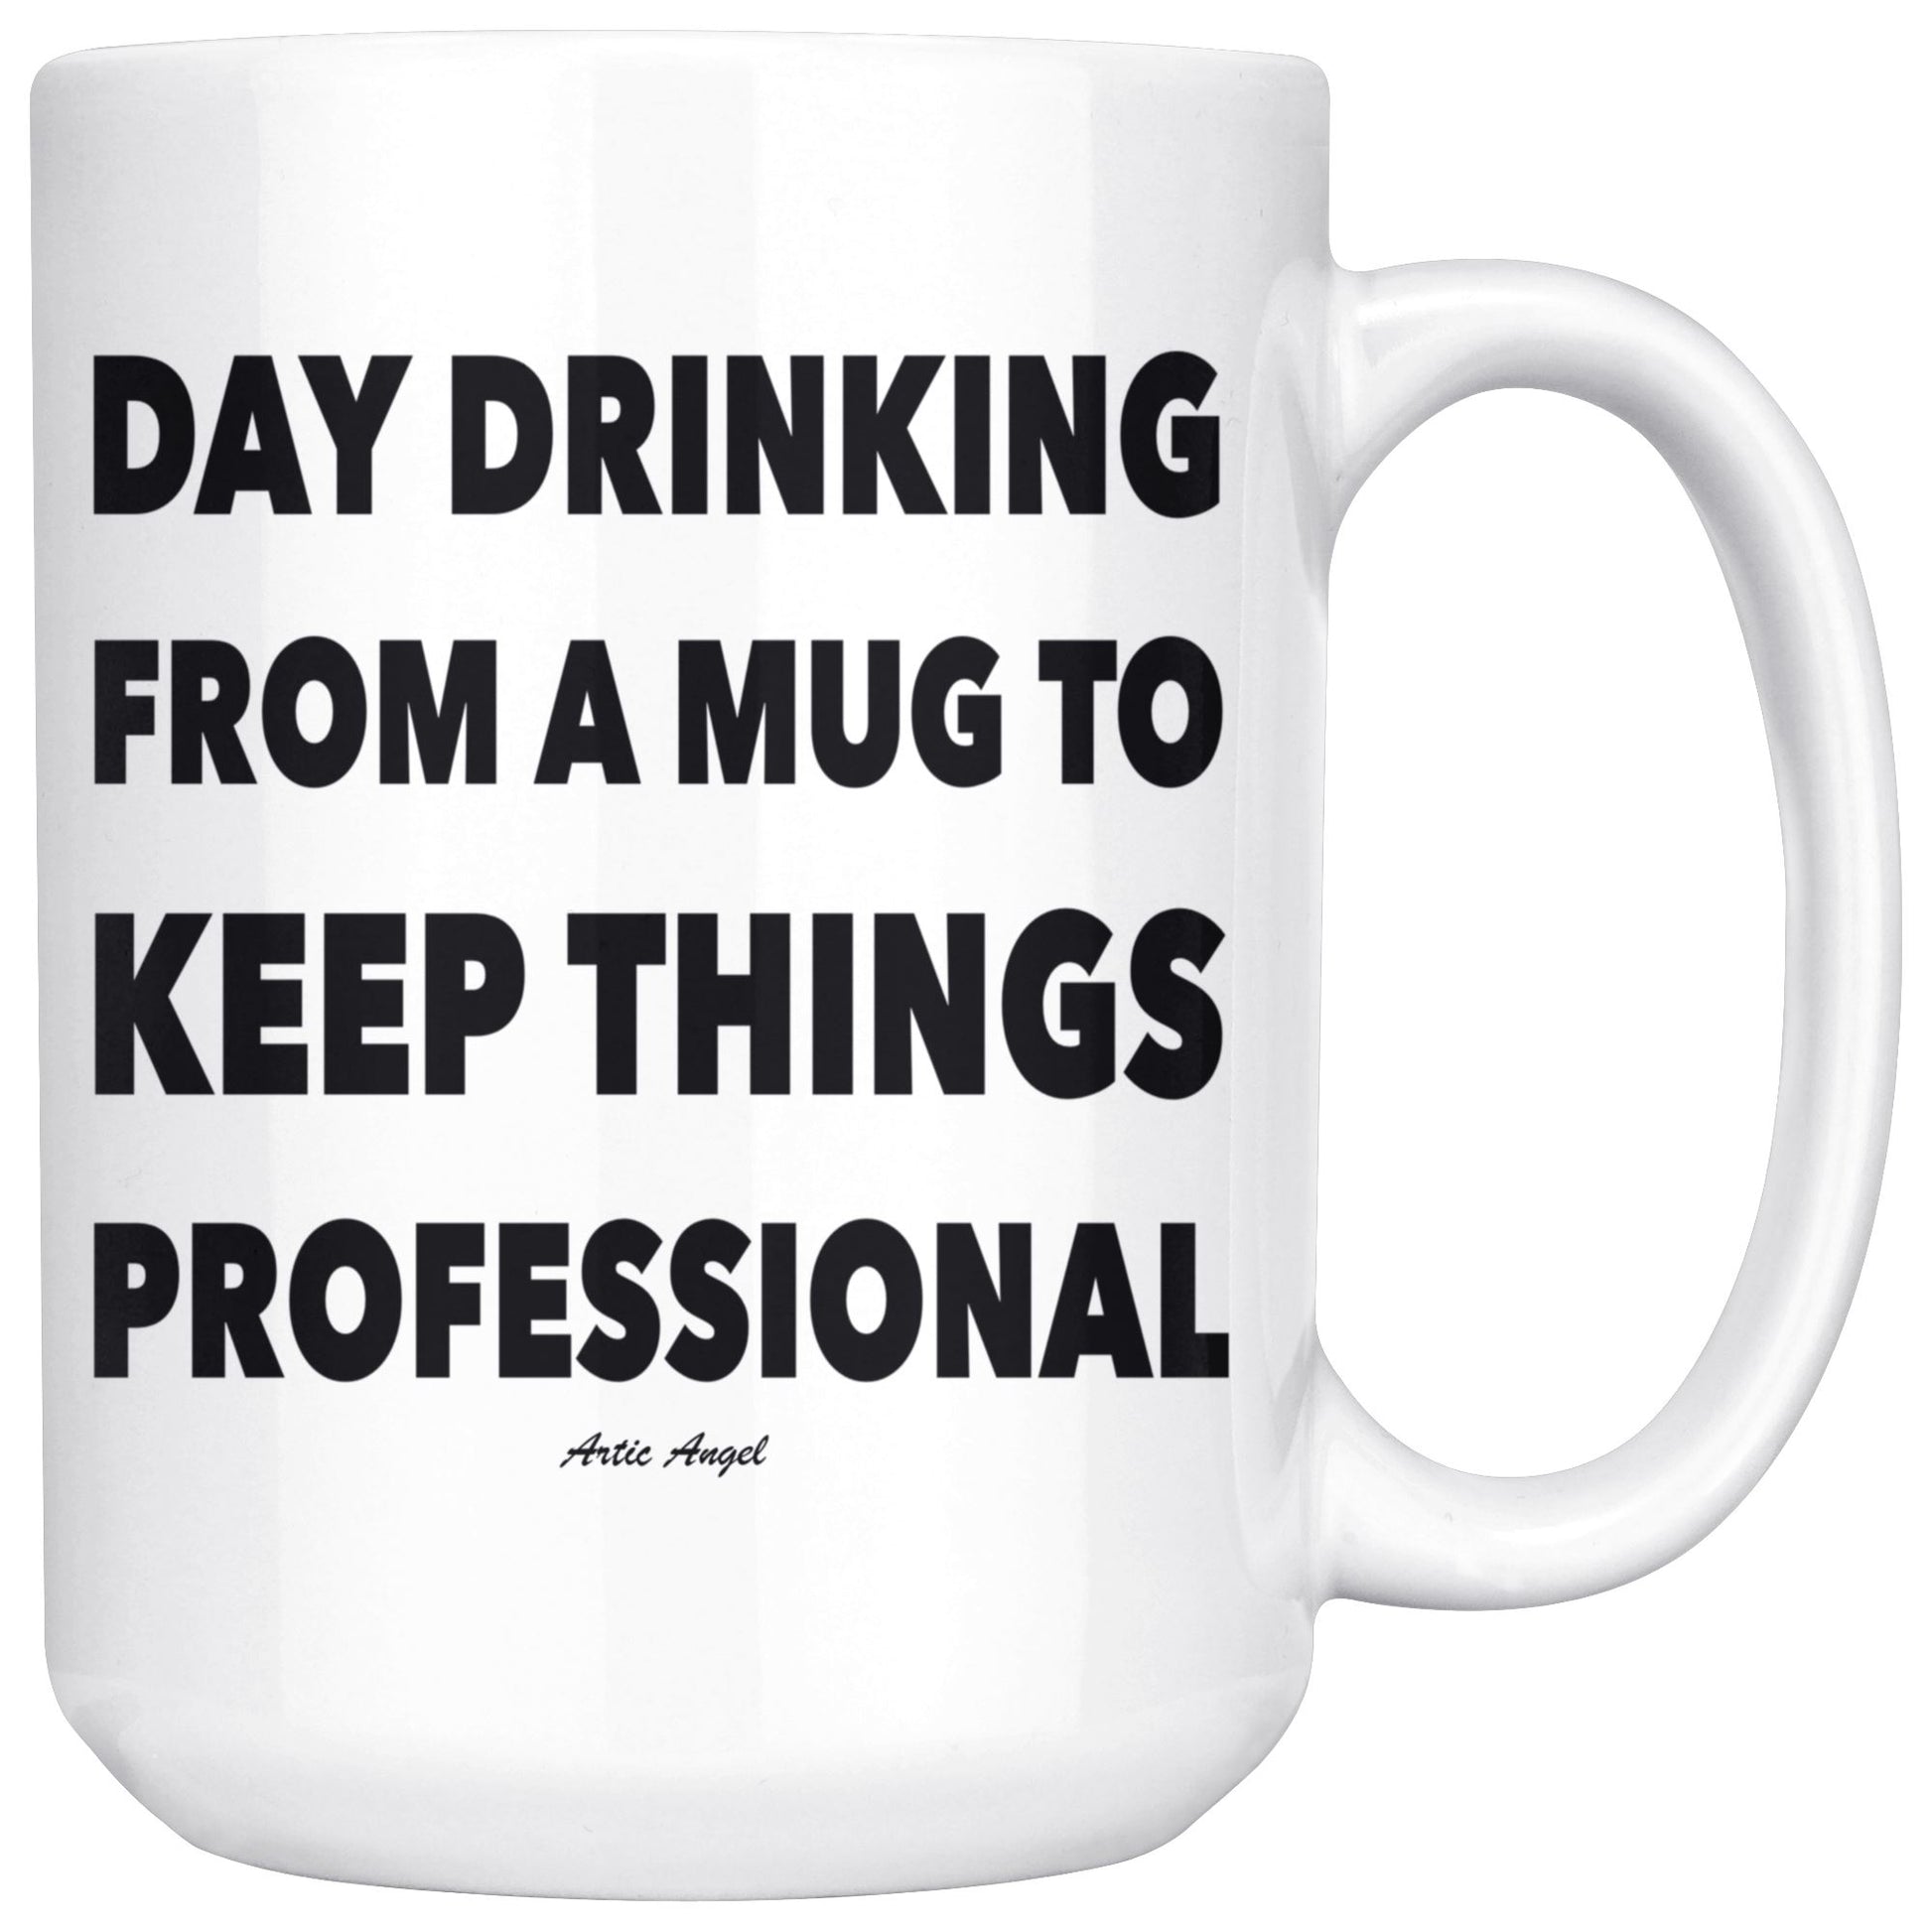 Funny "Day Drinking From A Mug To Keep Things Professional" - Coffee Mug Drinkware White - 15oz 